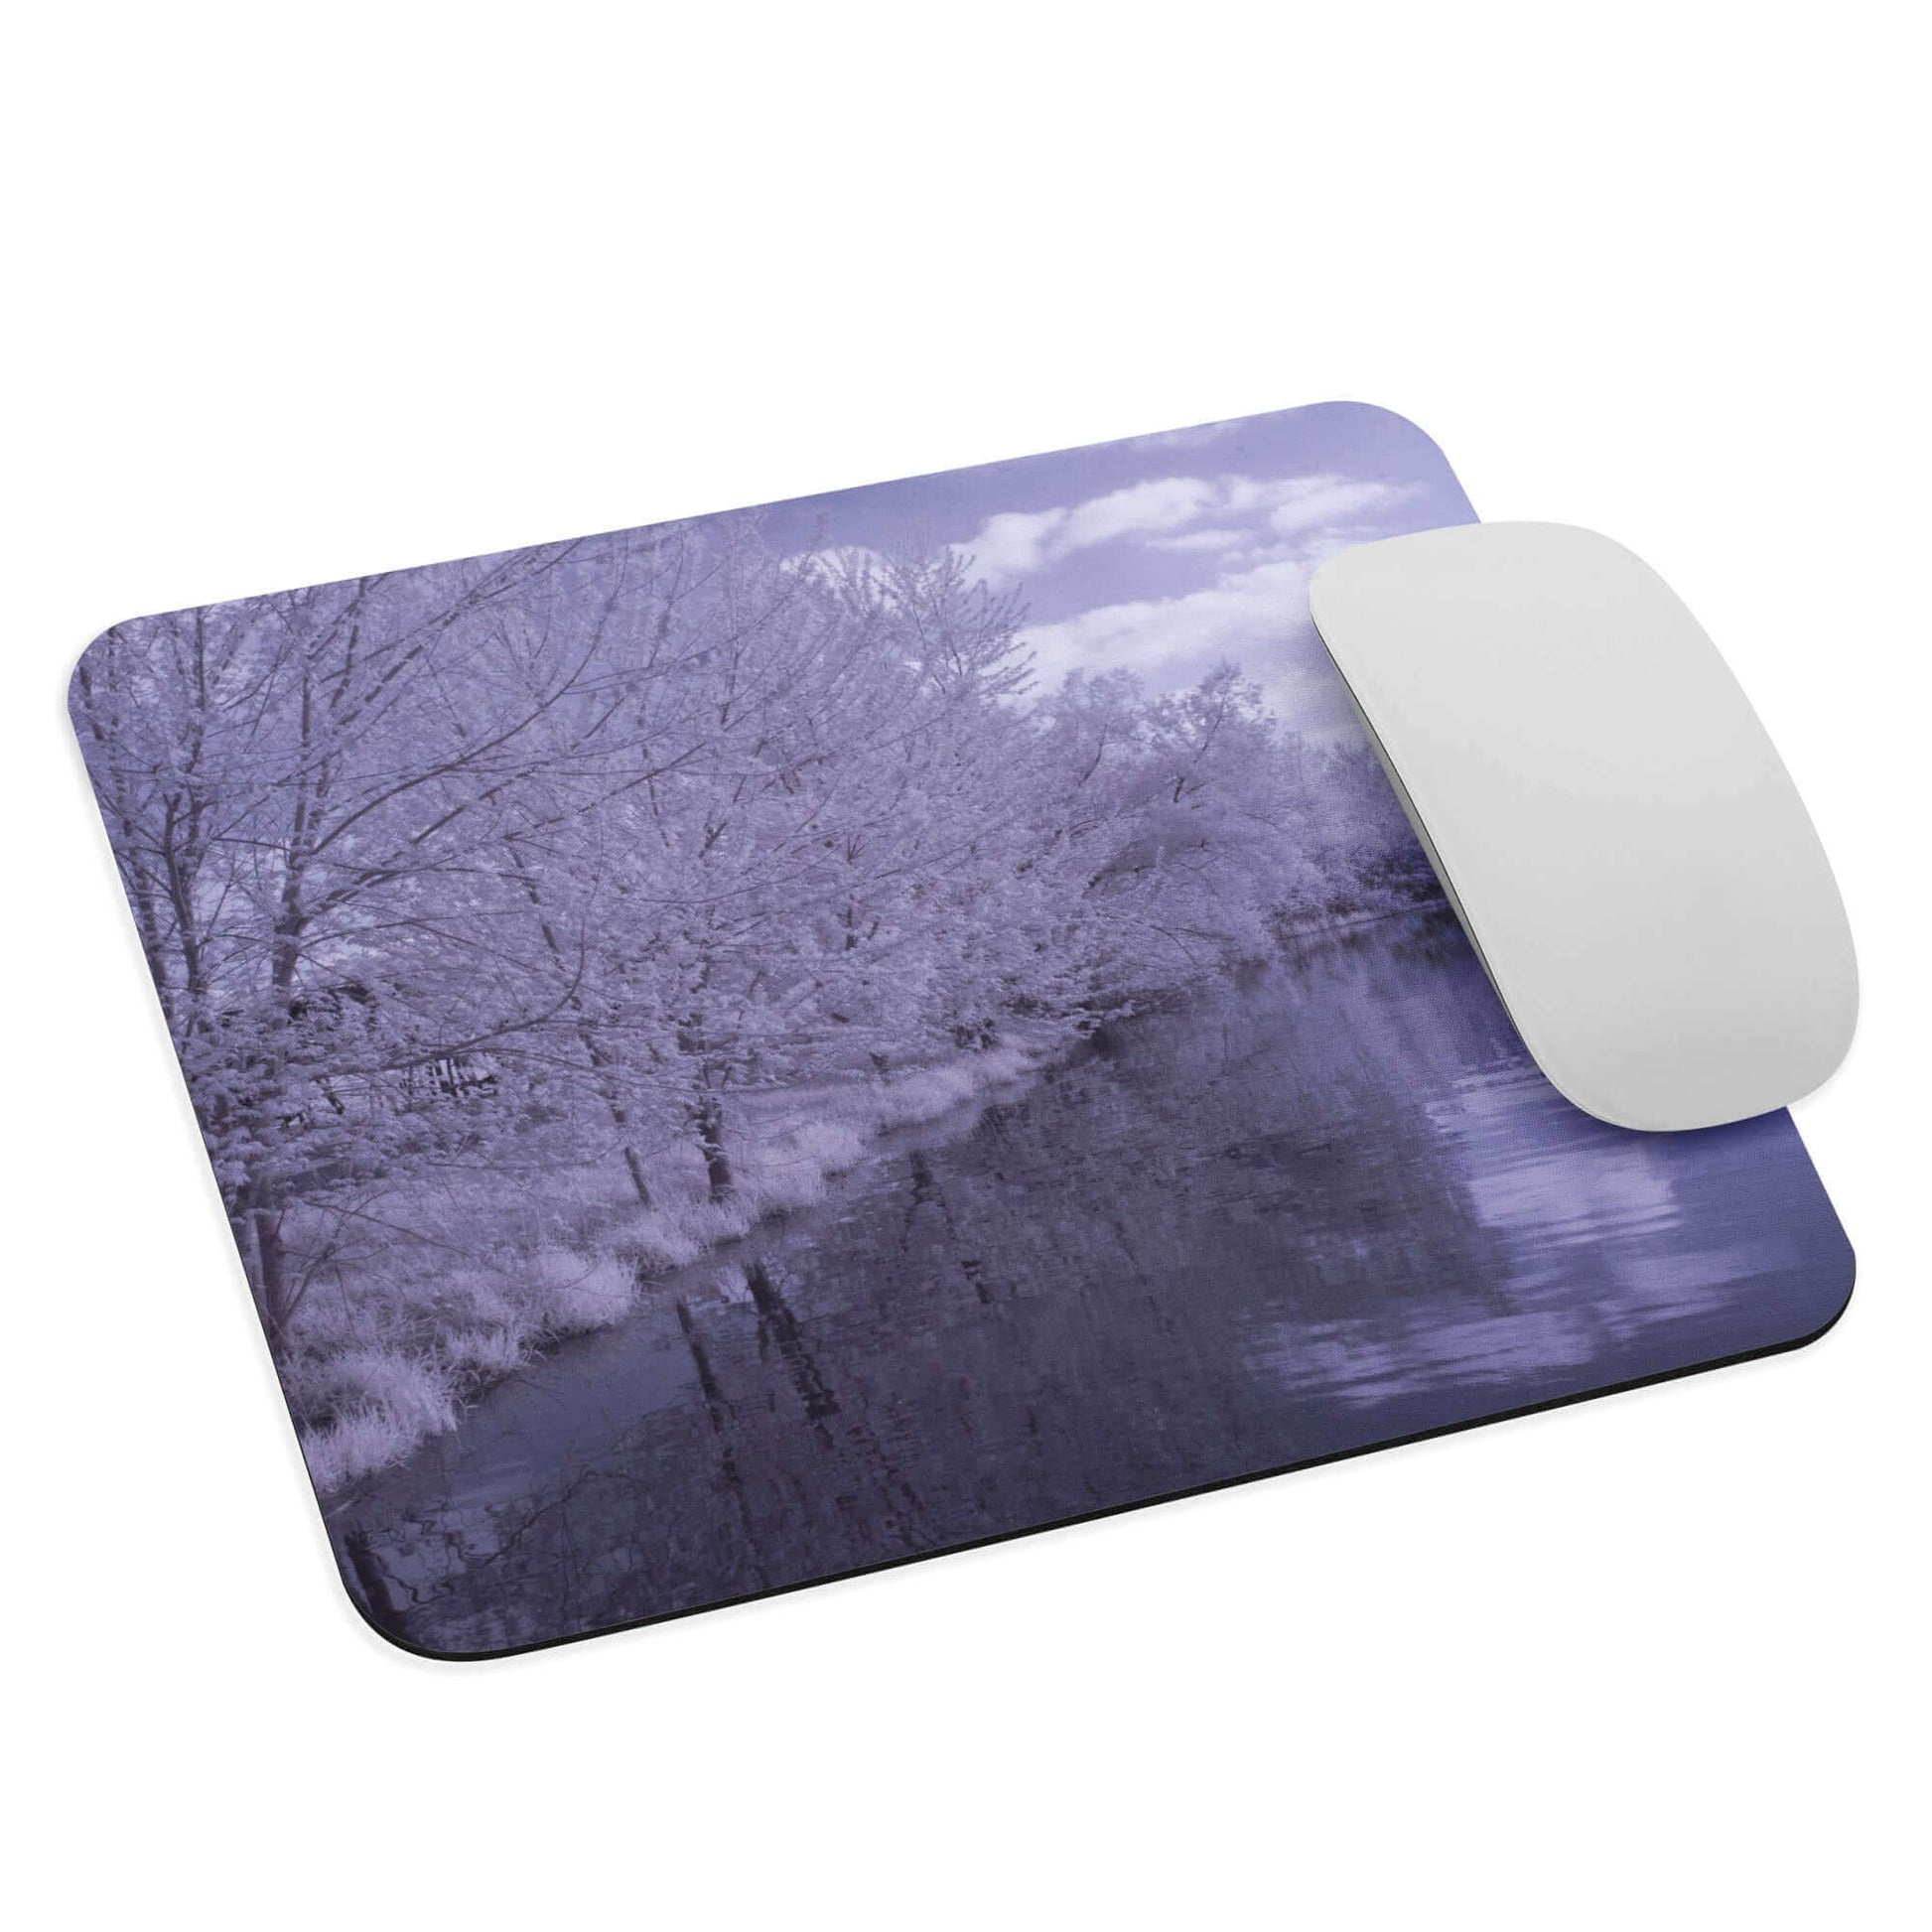 Infrared photo of Lake Julia - Mouse pad alien Farmington infra red infrared IR lake Lake Julia Minnesota photo photography